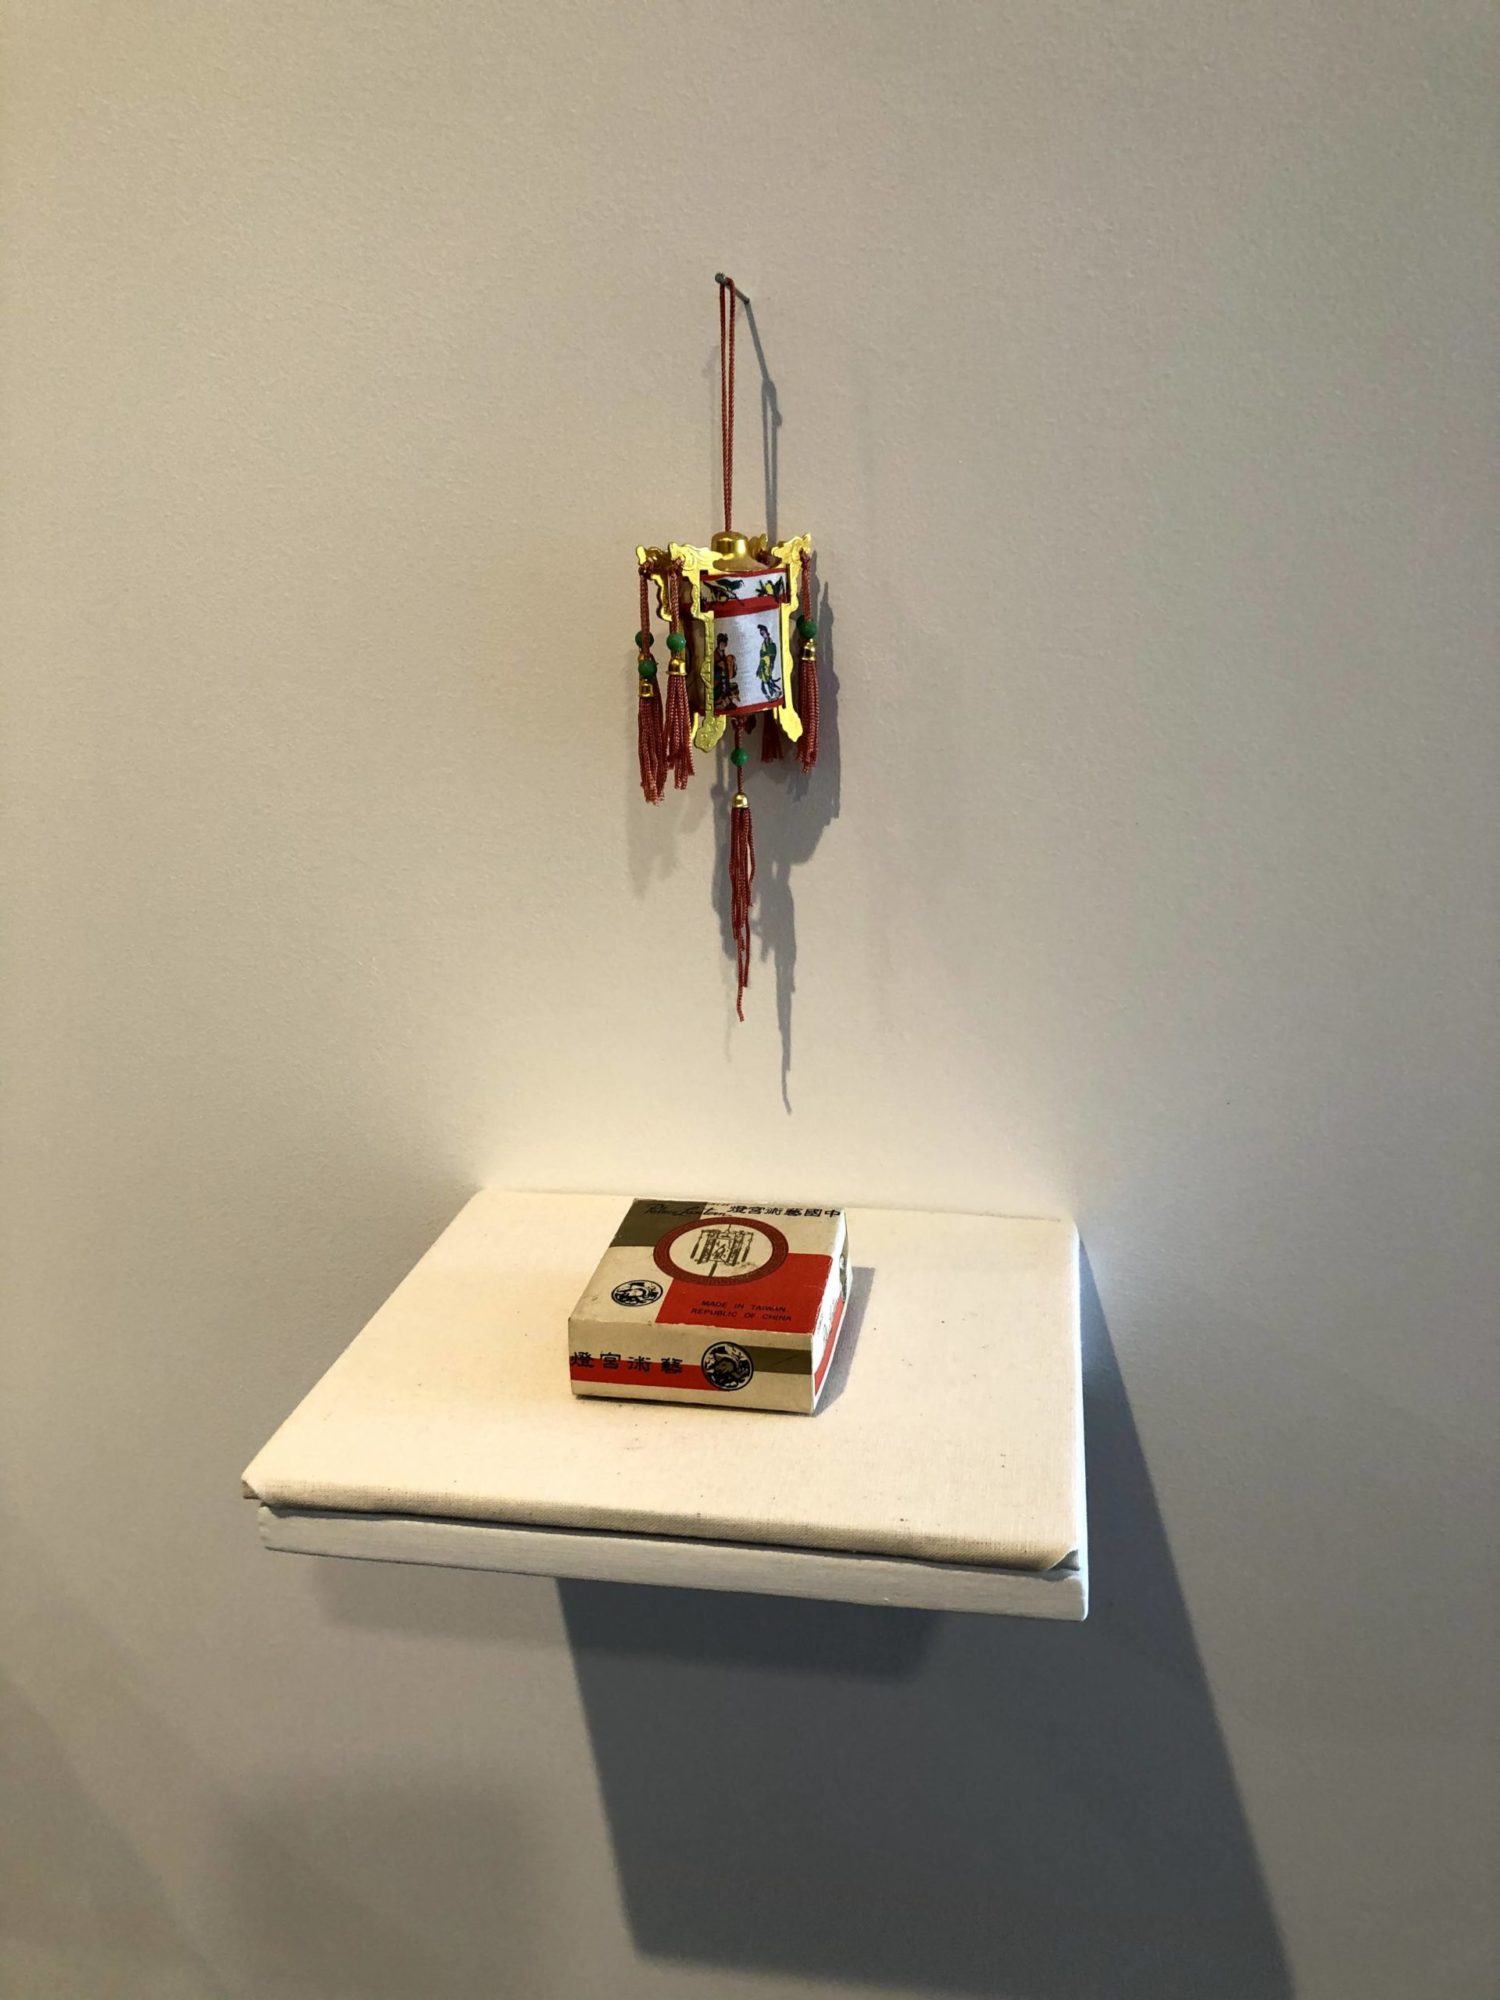 An installation view. There is a square floating self with a small, square, white, green, and red geometrically patterned box on it. Hanging on the wall above is small mixed media sculpture with red. green, and yellow tassels and beads.